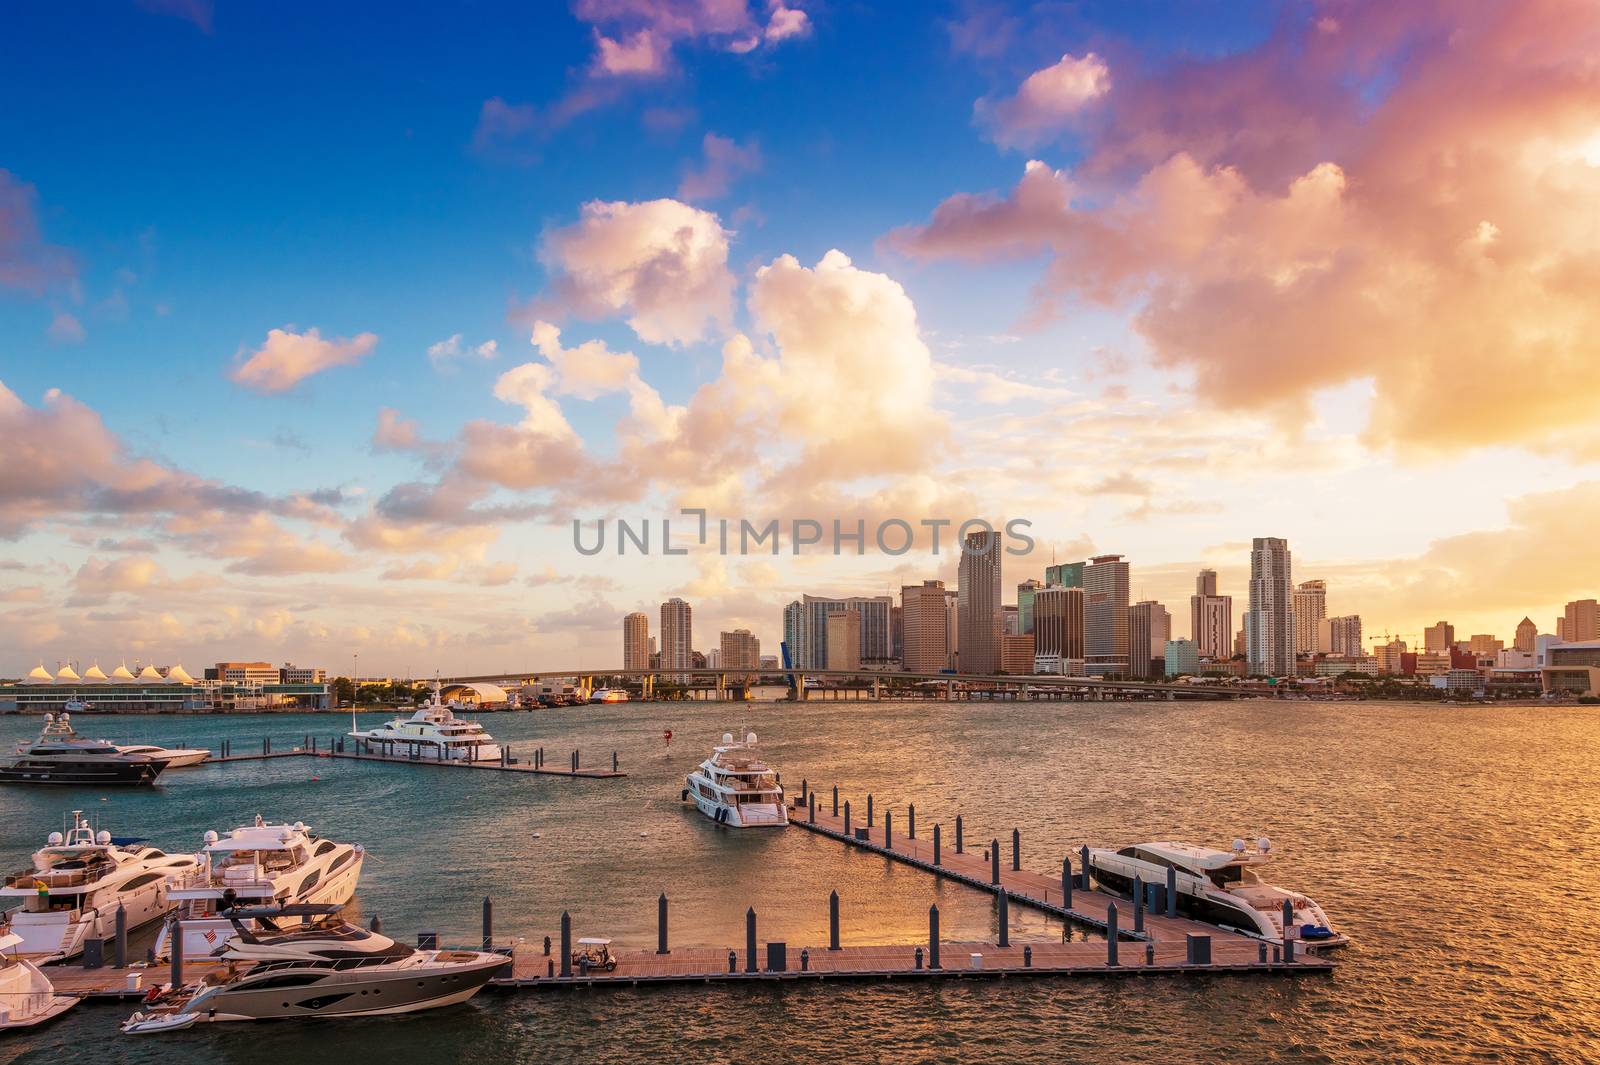 Downtown Miami, Florida, USA, and the port, seen from MacArthur Causeway at sunset.